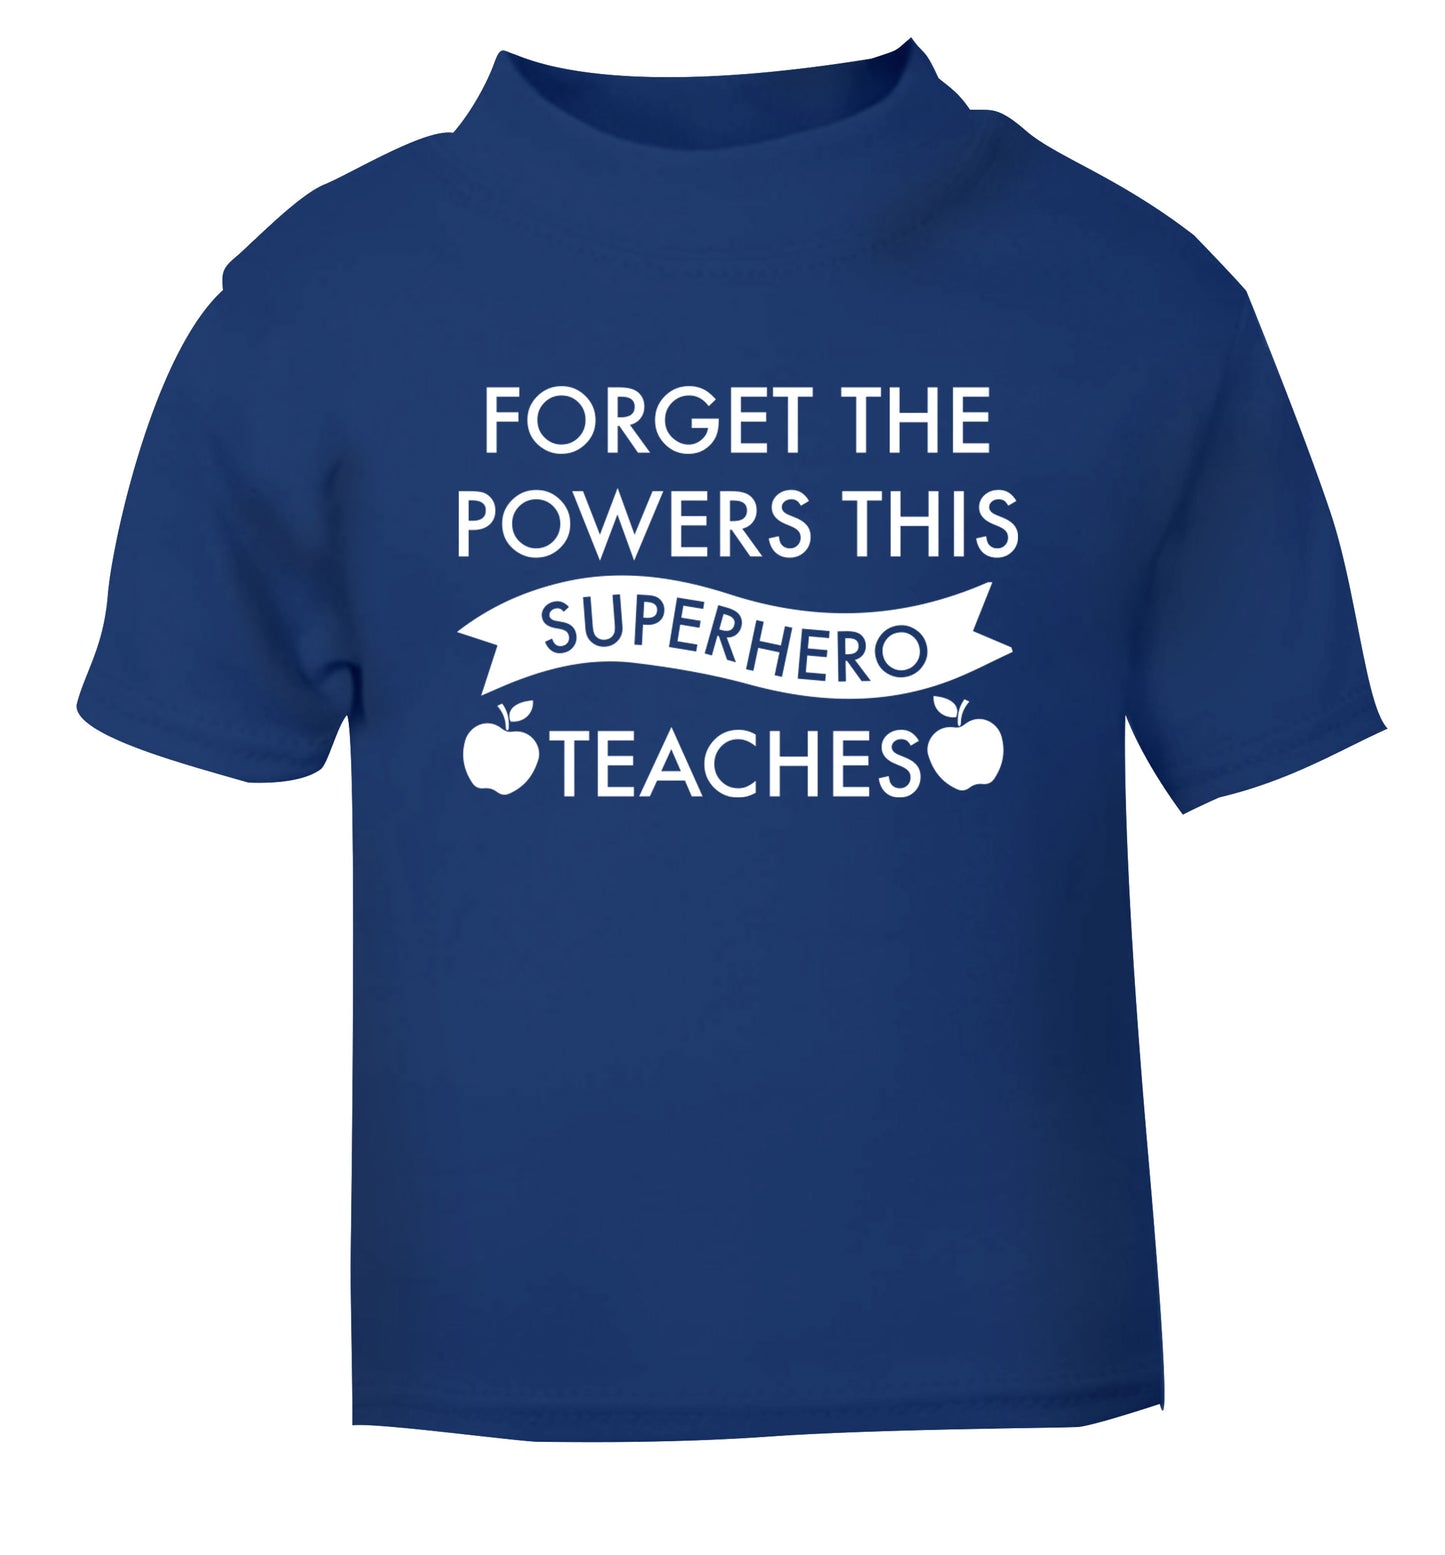 Forget the powers this superhero teaches blue Baby Toddler Tshirt 2 Years